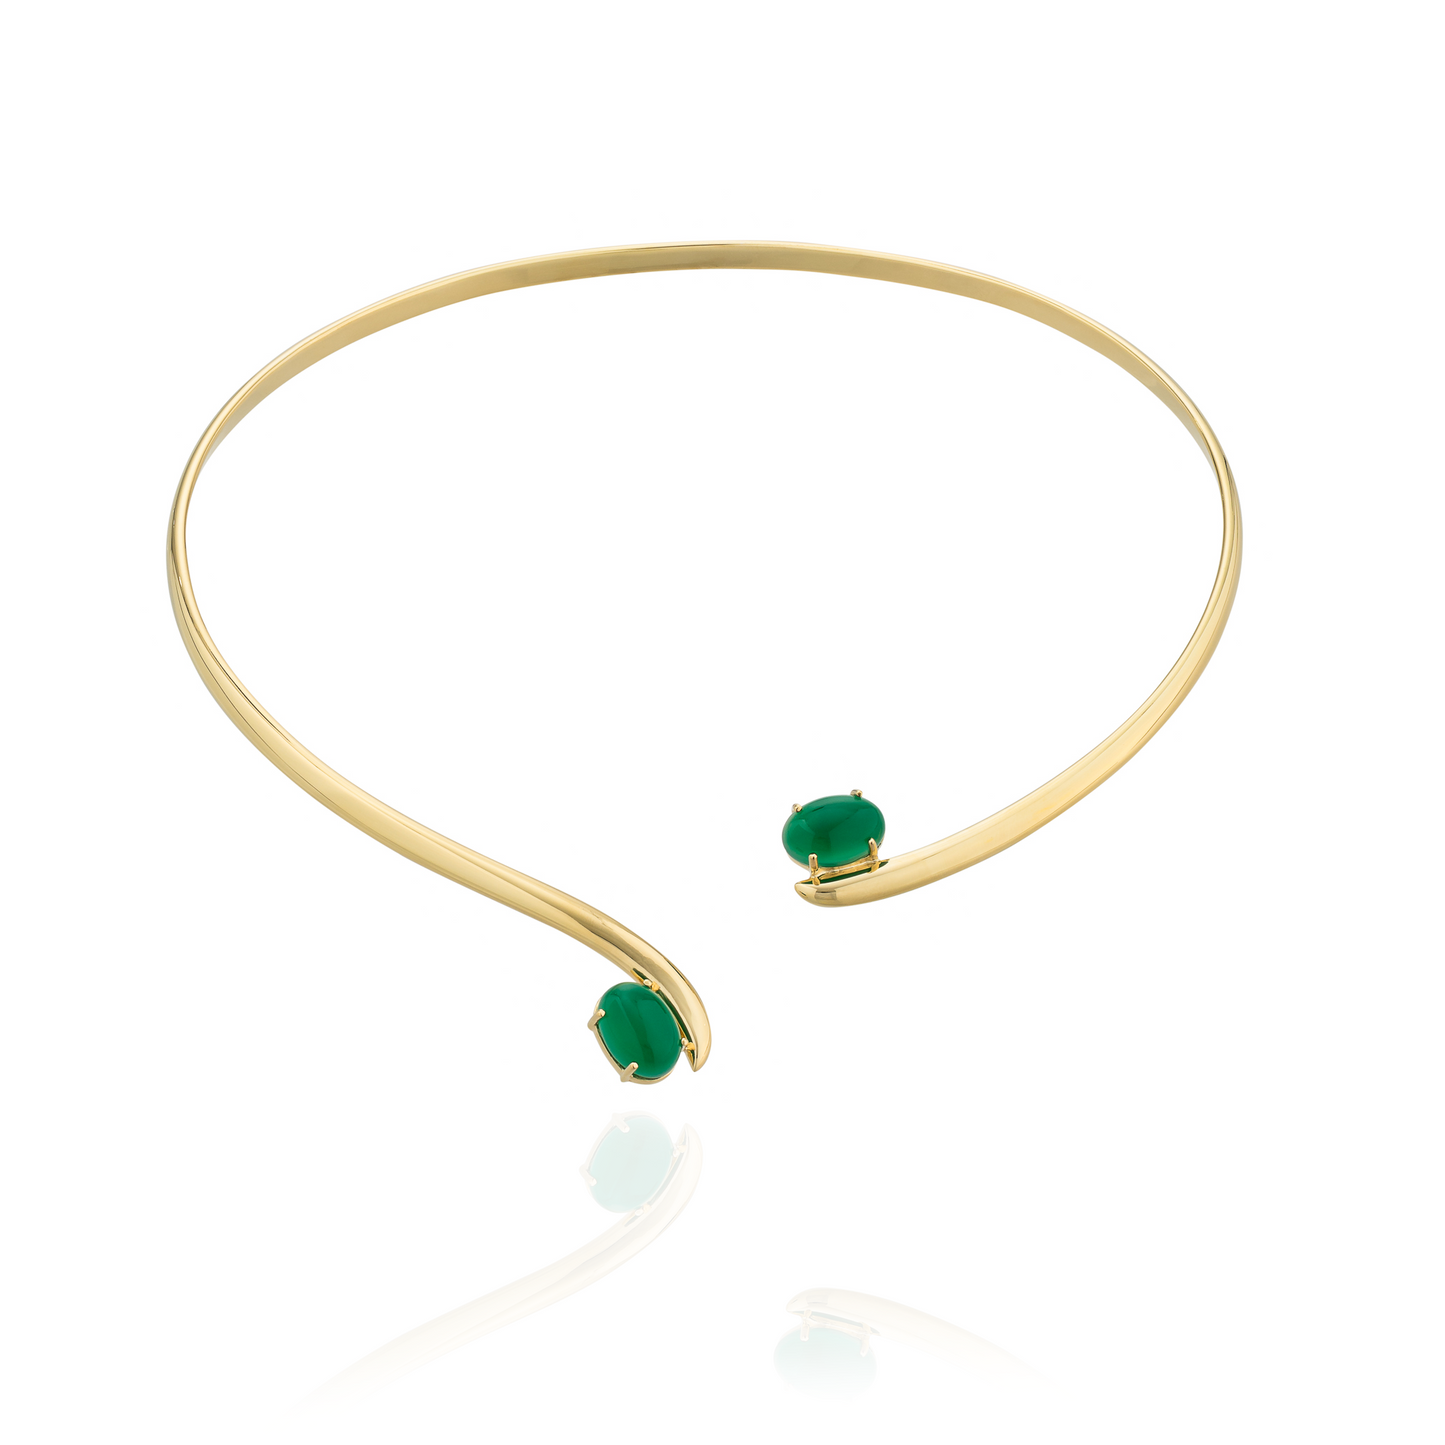 Caramelo 925 Silver Necklace  18KT Yellow Gold Plated with Green Onyx